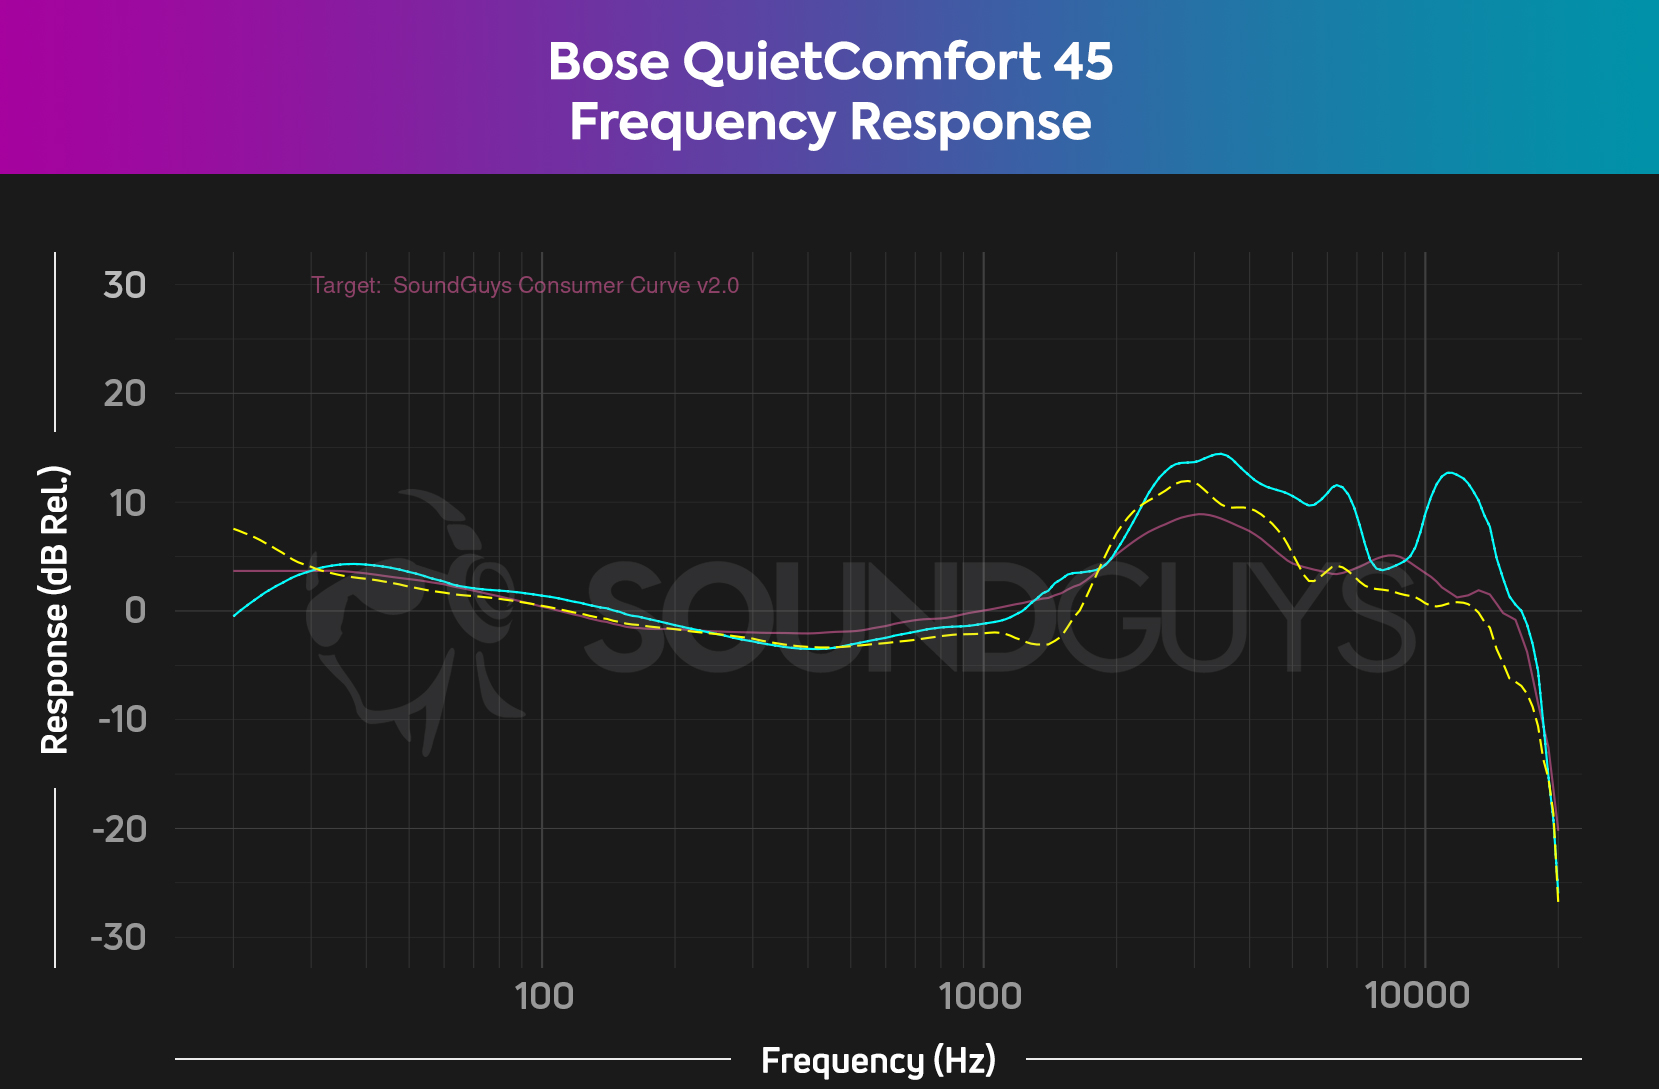 A plot comparing the very similar frequency responses of the Bose QuietComfort 45 to the Bose QuietComfort 35 II.